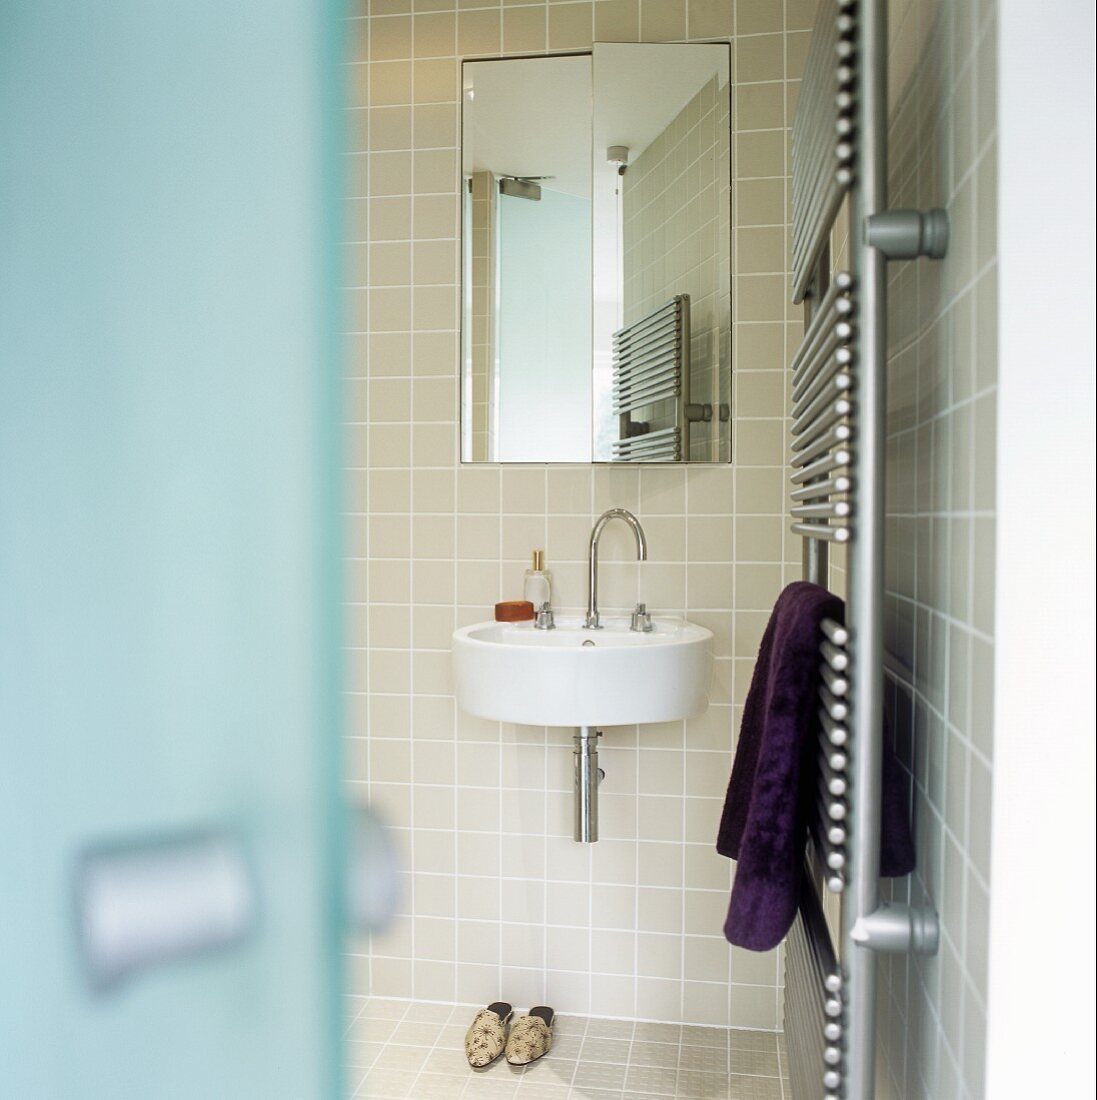 A view into a bathroom with a heated towel rail